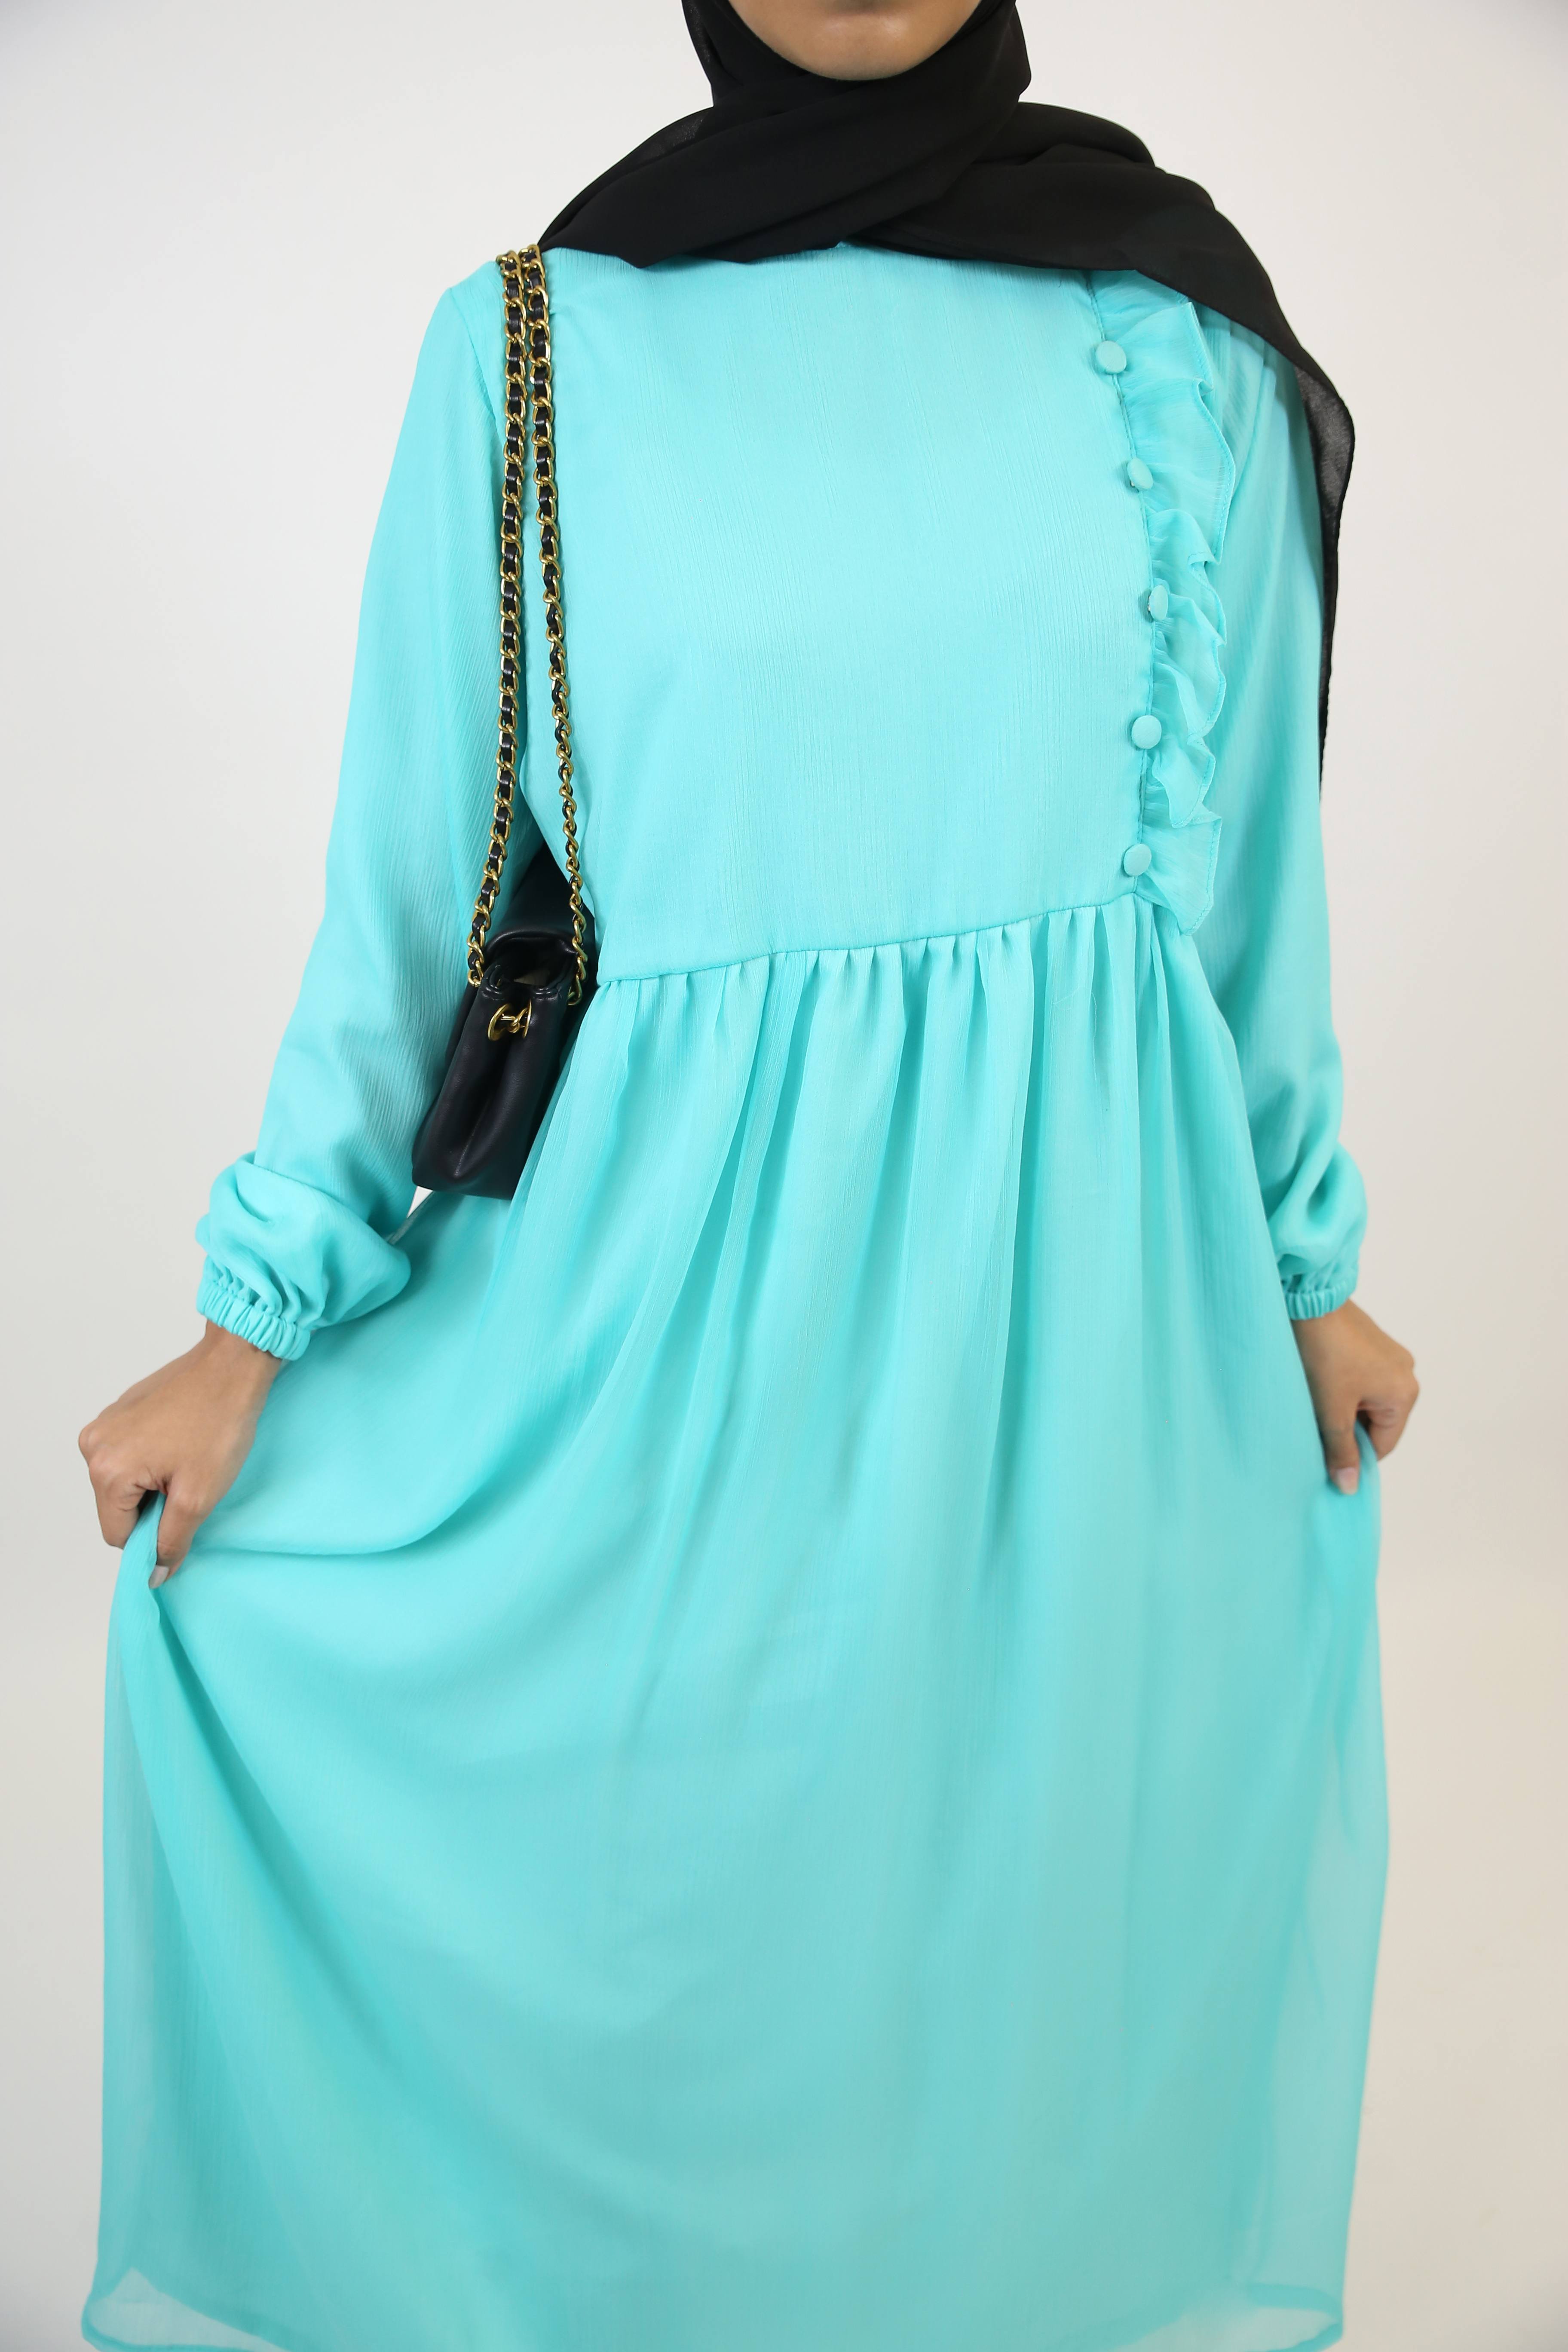 Feerozi- Alluring Chiffon fully lined maxi dress with ruffled front detailings- Turquoise blue